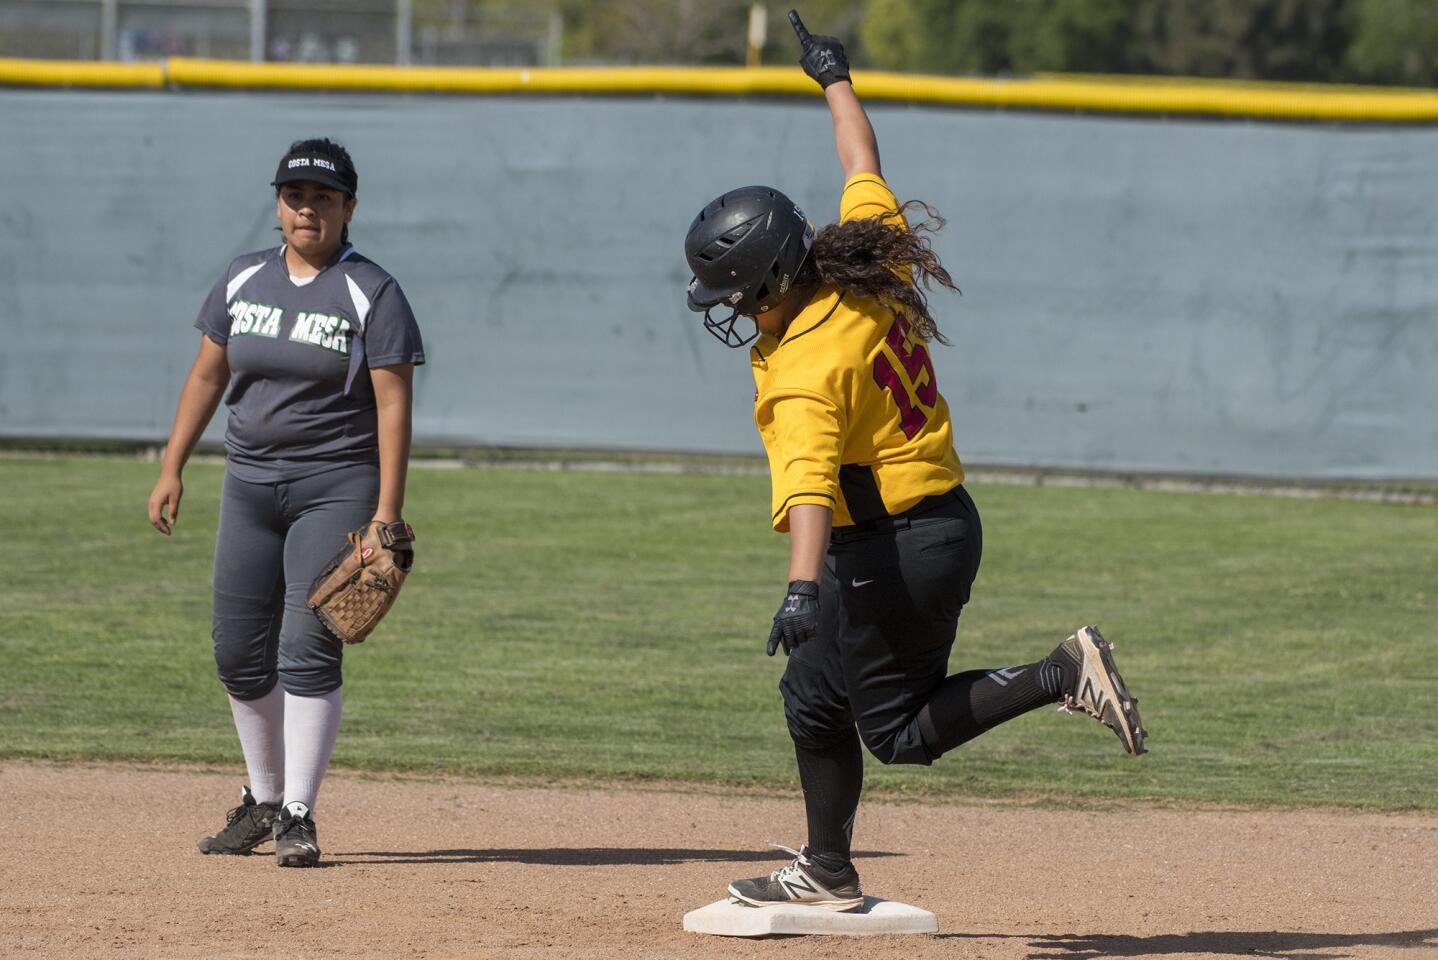 Estancia's Kyra Avila rounds second after hitting a three-run homerun in the fourth inning against Costa Mesa on Monday, April 9.